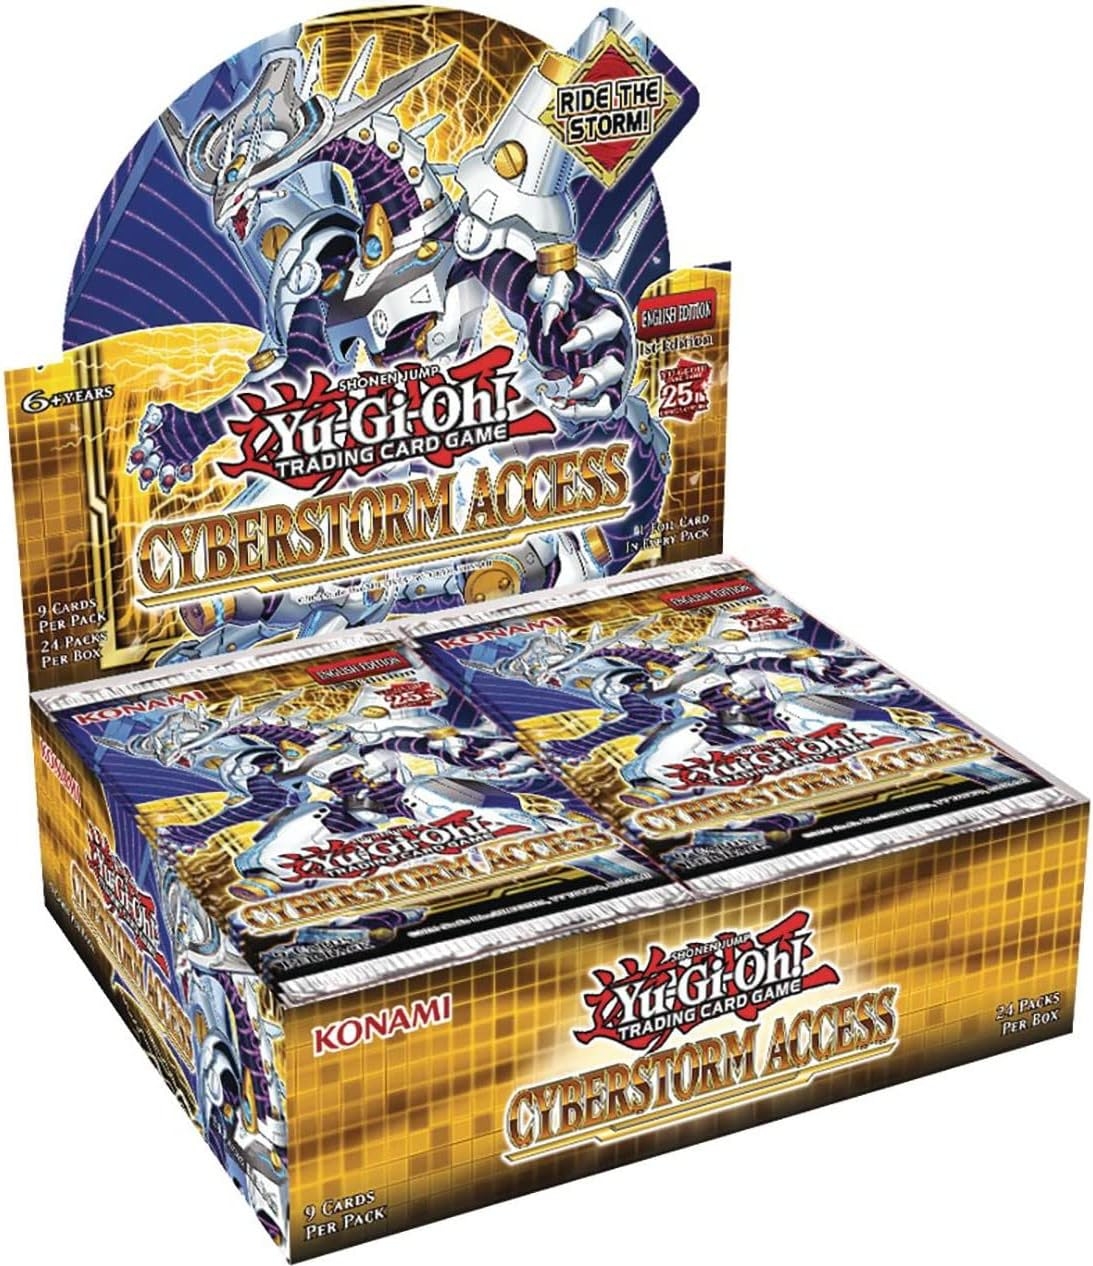 YU-GI-OH! Cyberstorm Access Booster Box   price checker   price checker Description Gallery Reviews Variations Additional